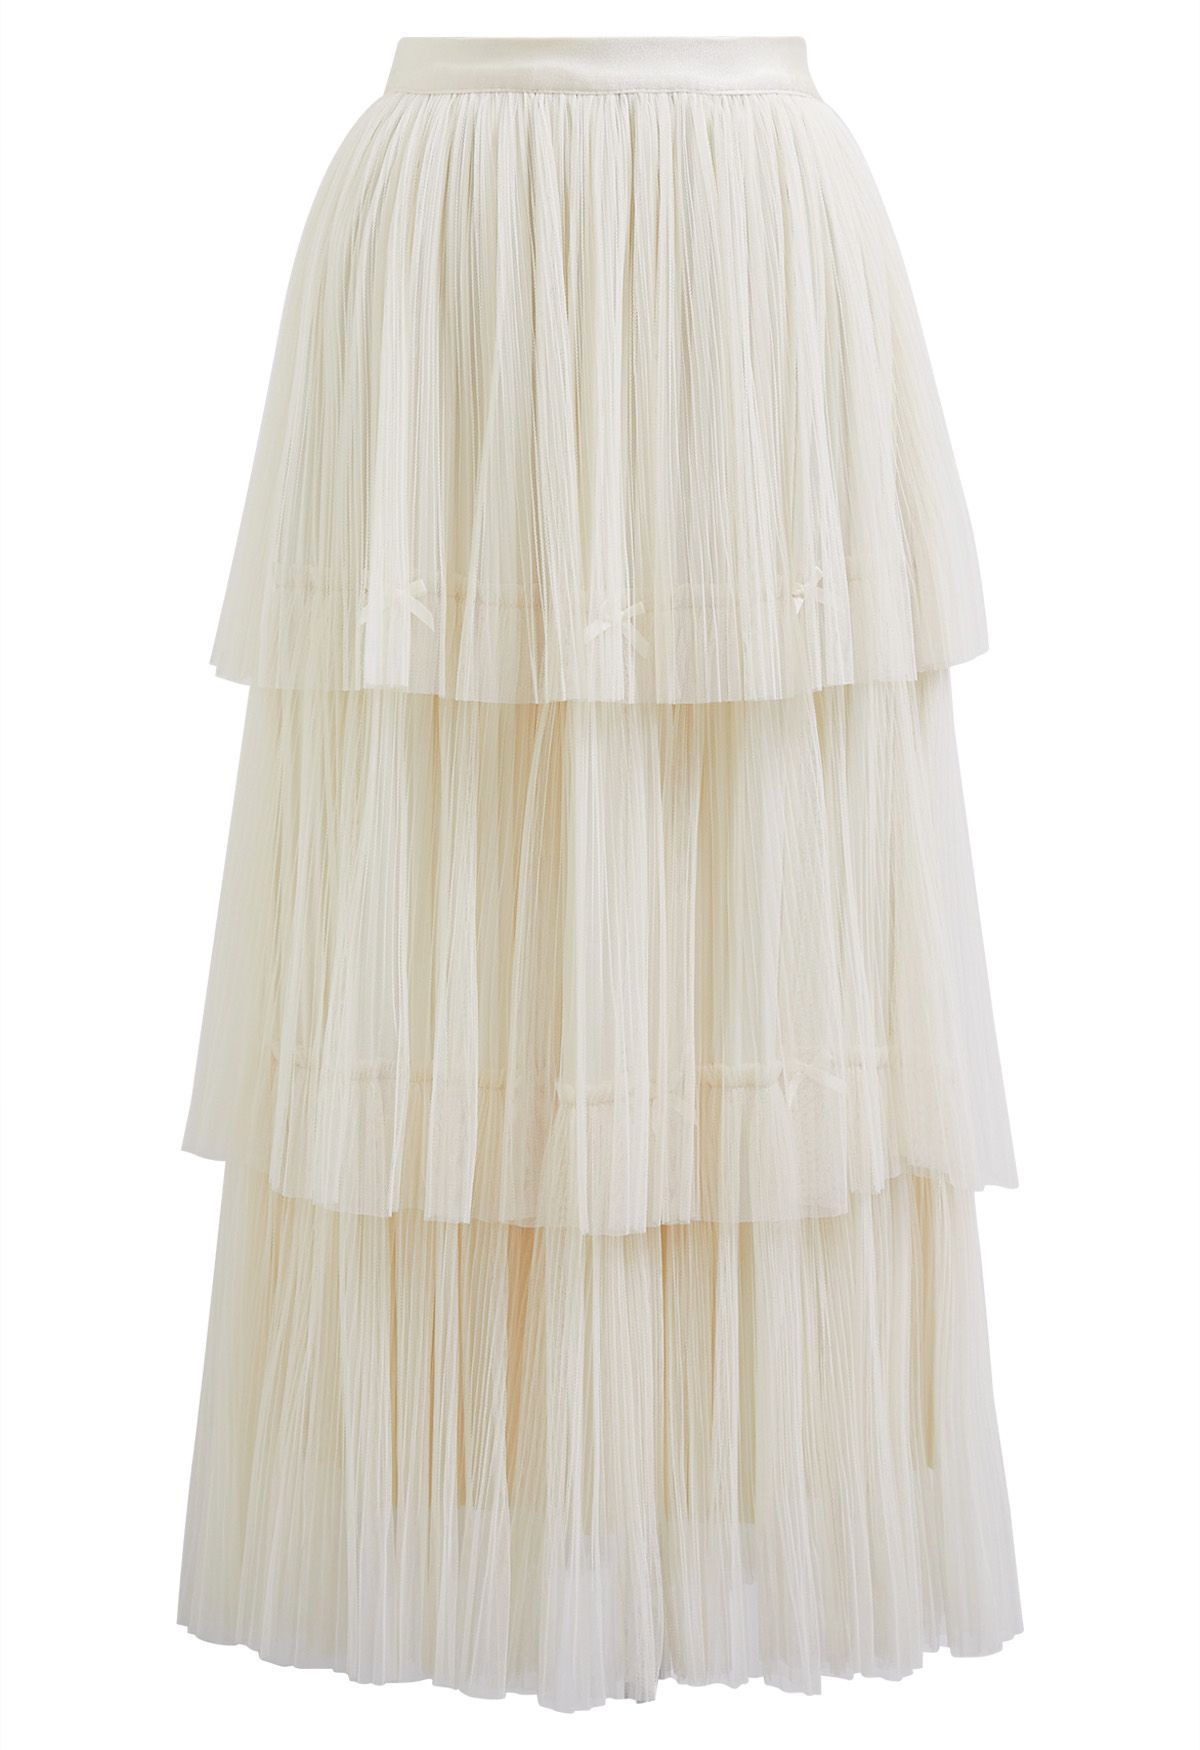 Bowknot Embellished Plisse Tiered Mesh Tulle Skirt in Cream